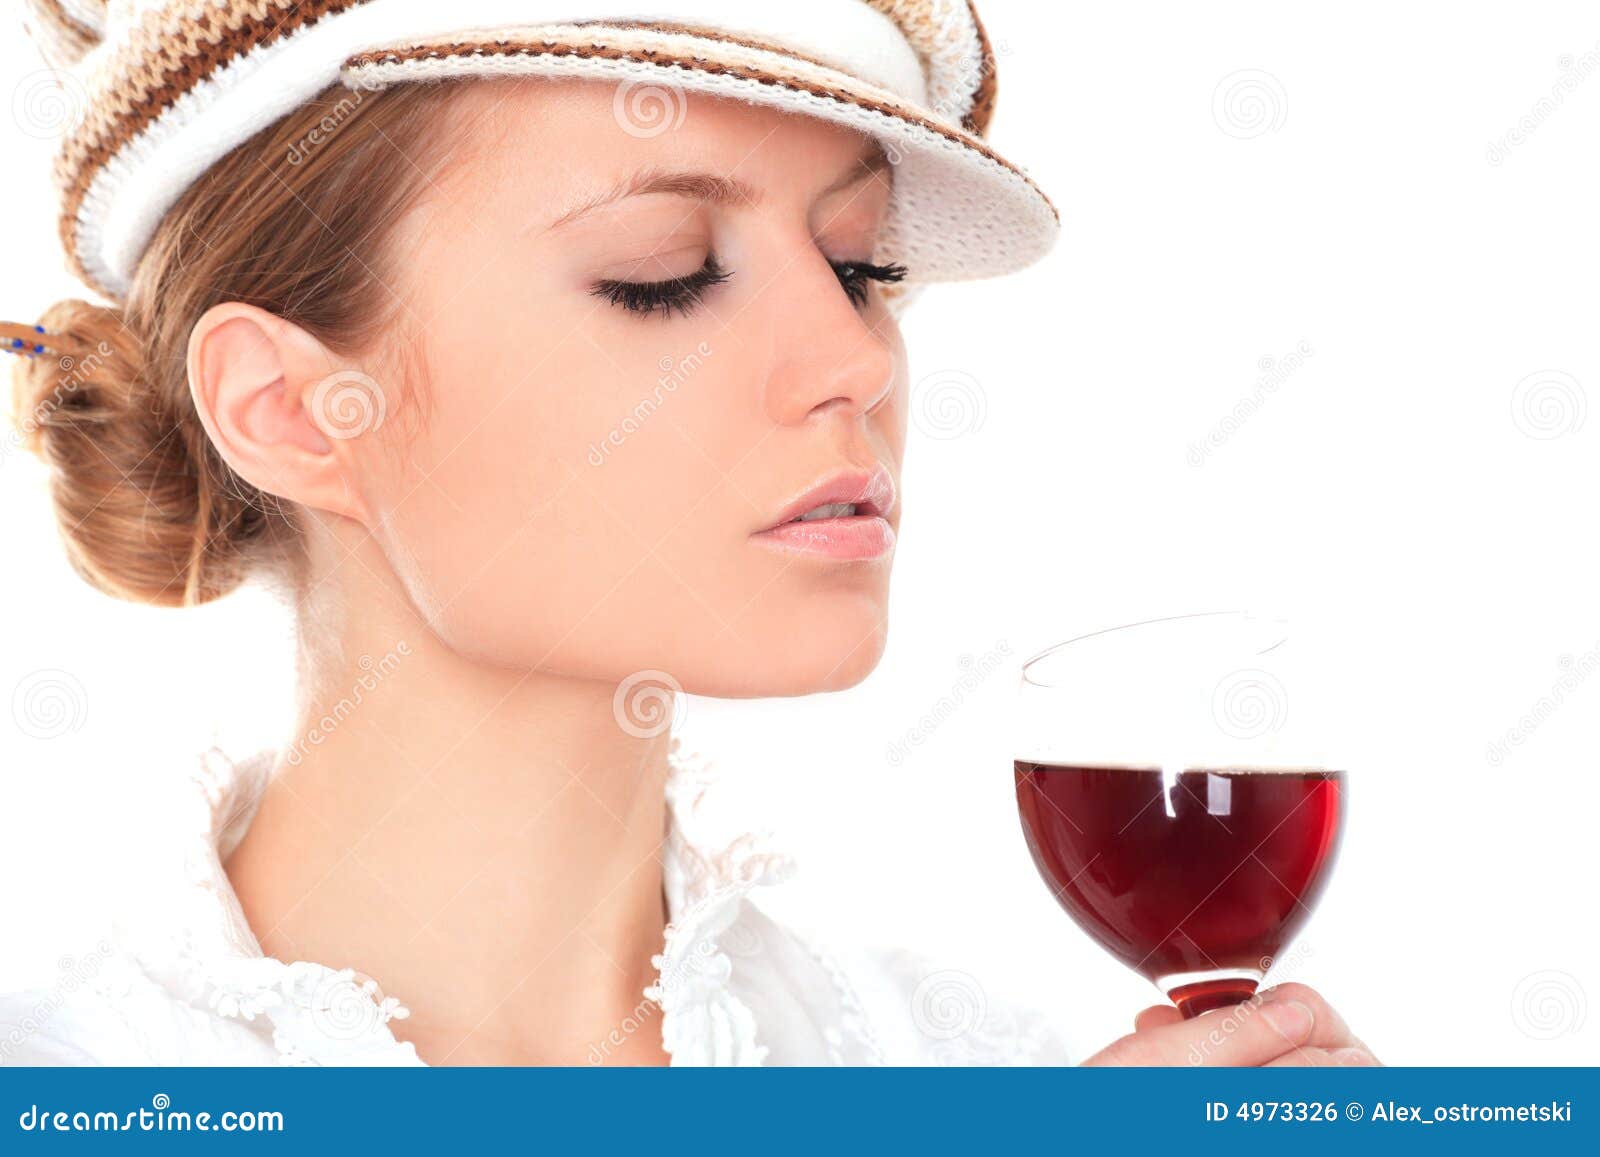 Lady With A Glass Of Wine Royalty Free Stock Image - Image: 4973326